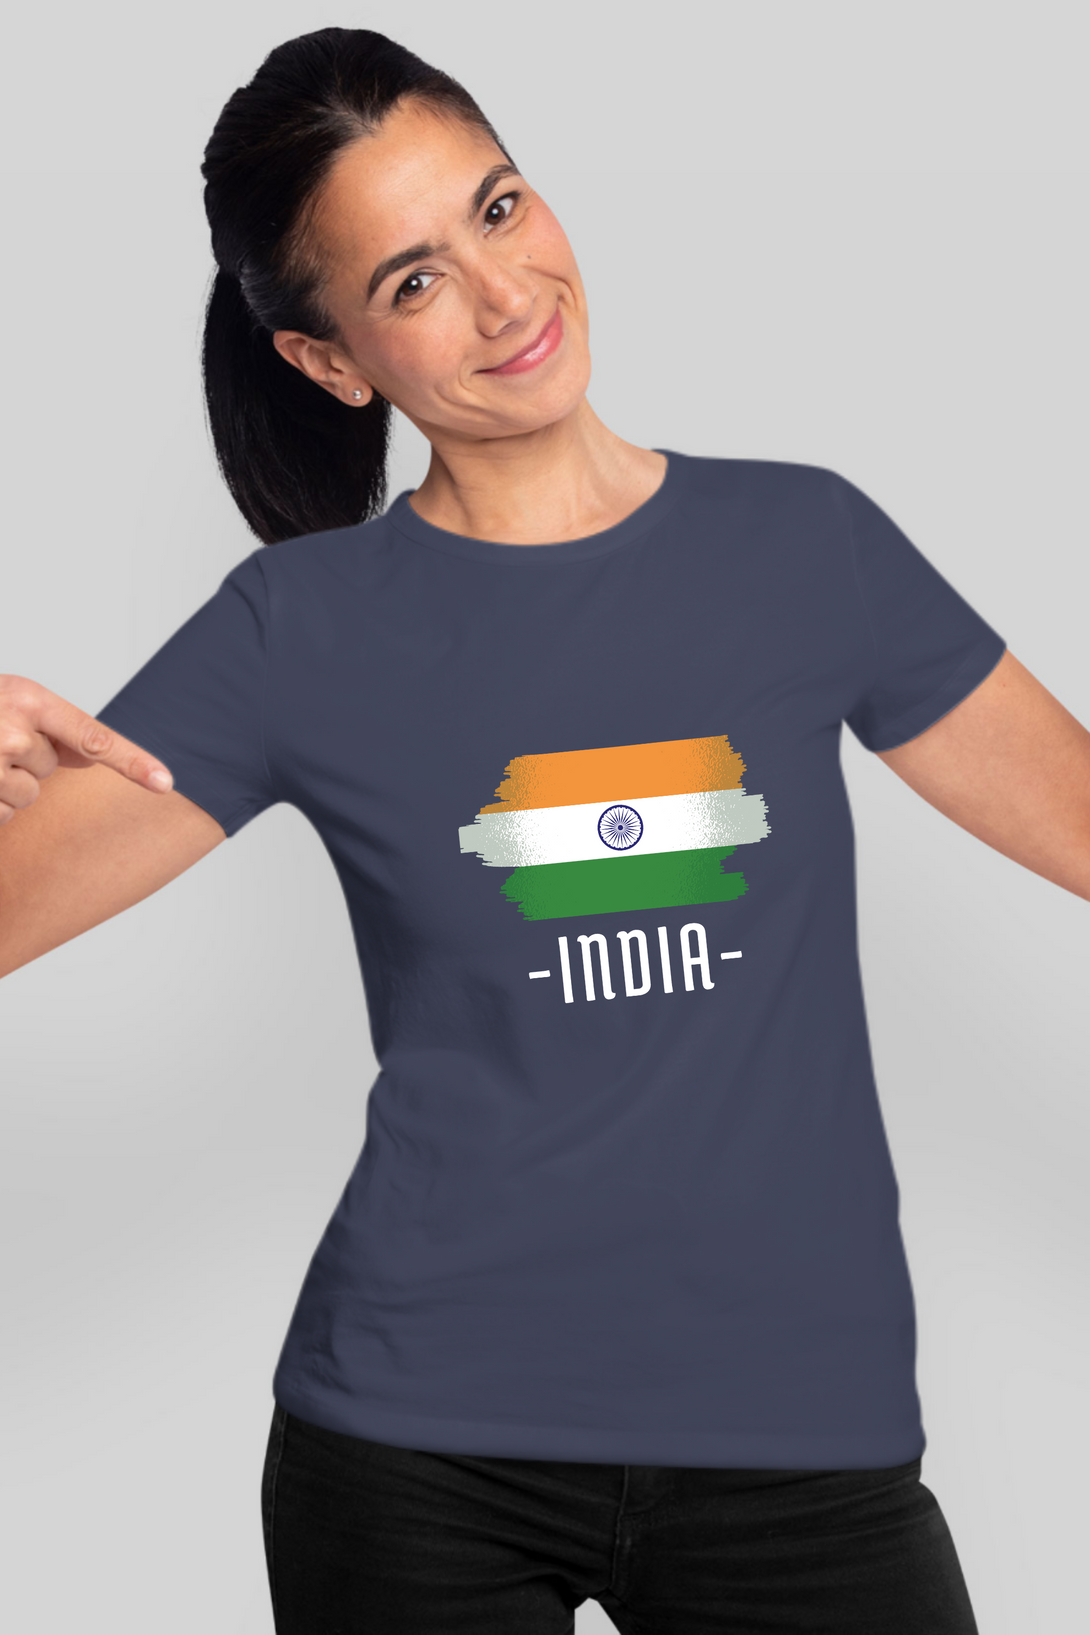 Proud Tricolor Printed T-Shirt For Women - WowWaves - 9